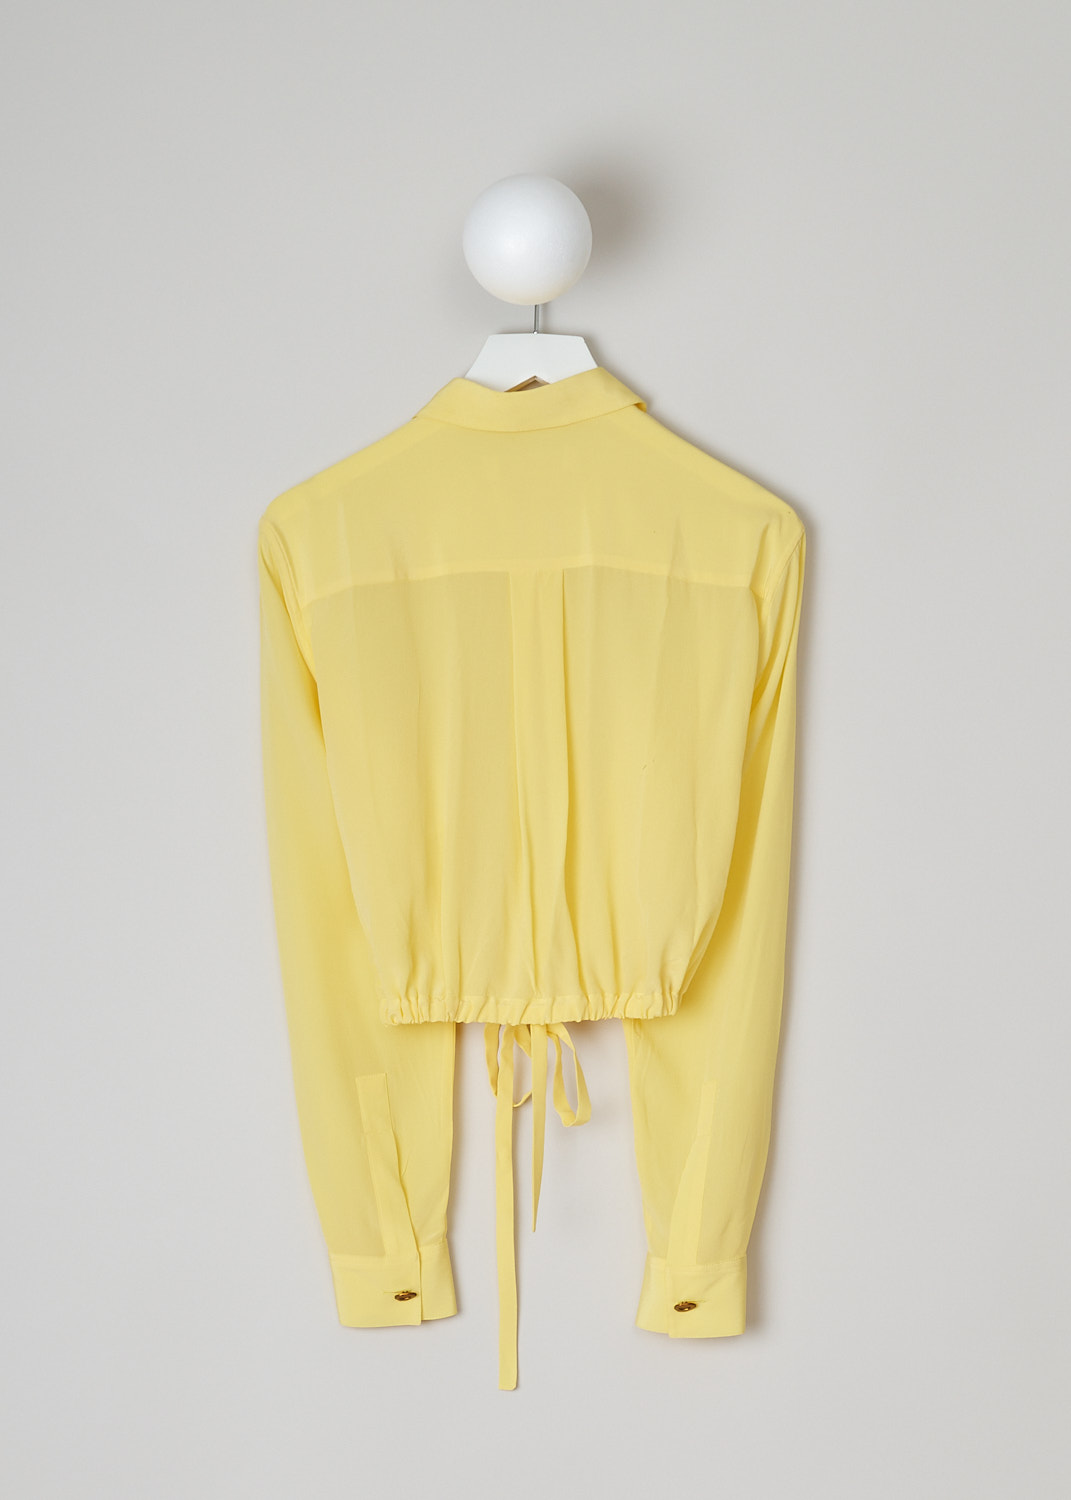 MARNI, LEMON YELLOW SILK CRÊPE DE CHINE BLOUSE, CAMA0526A0_UTSF72_00Y20, Yellow, Back, This cropped silk crêpe de Chine blouse in lemon yellow has a pointed collar and a front button closure, with a bronze-colored top button. The long sleeves cuffs with those same bronze-colored buttons. In the front, the blouse has a single breast pocket. The hemline has a drawstring. 
  
